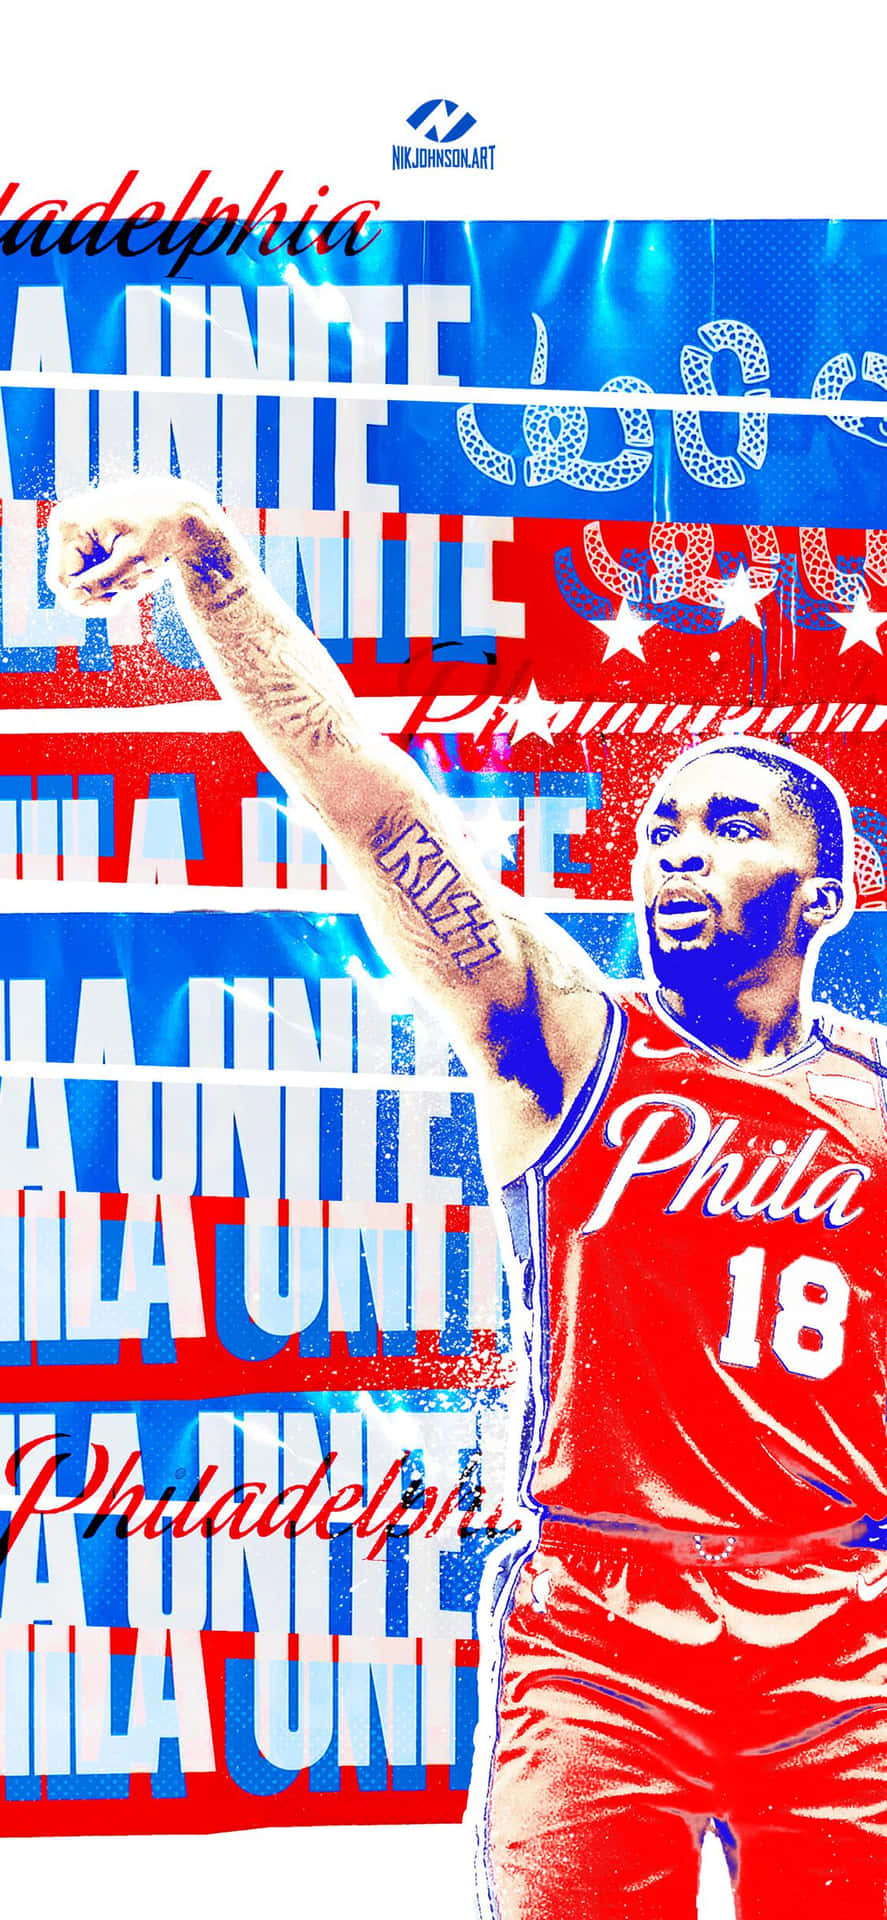 Unleash your team spirit with the official 76ers iPhone Wallpaper